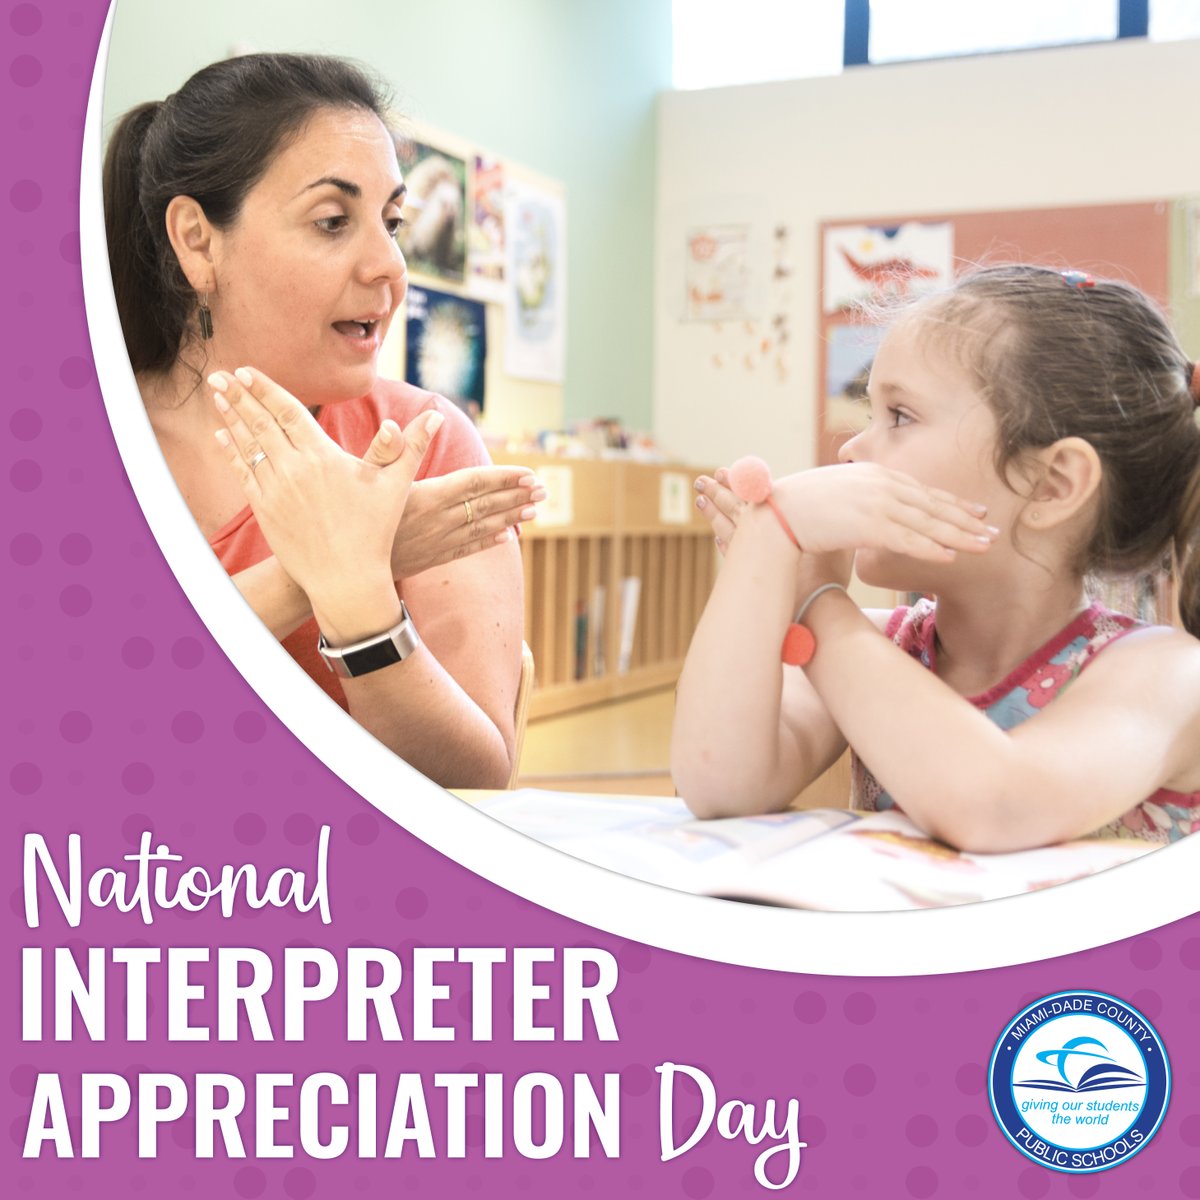 Today is National #InterpreterAppreciationDay. We acknowledge the vital role interpreters play in bridging communication and fostering inclusion. Thank you to our amazing interpreters!